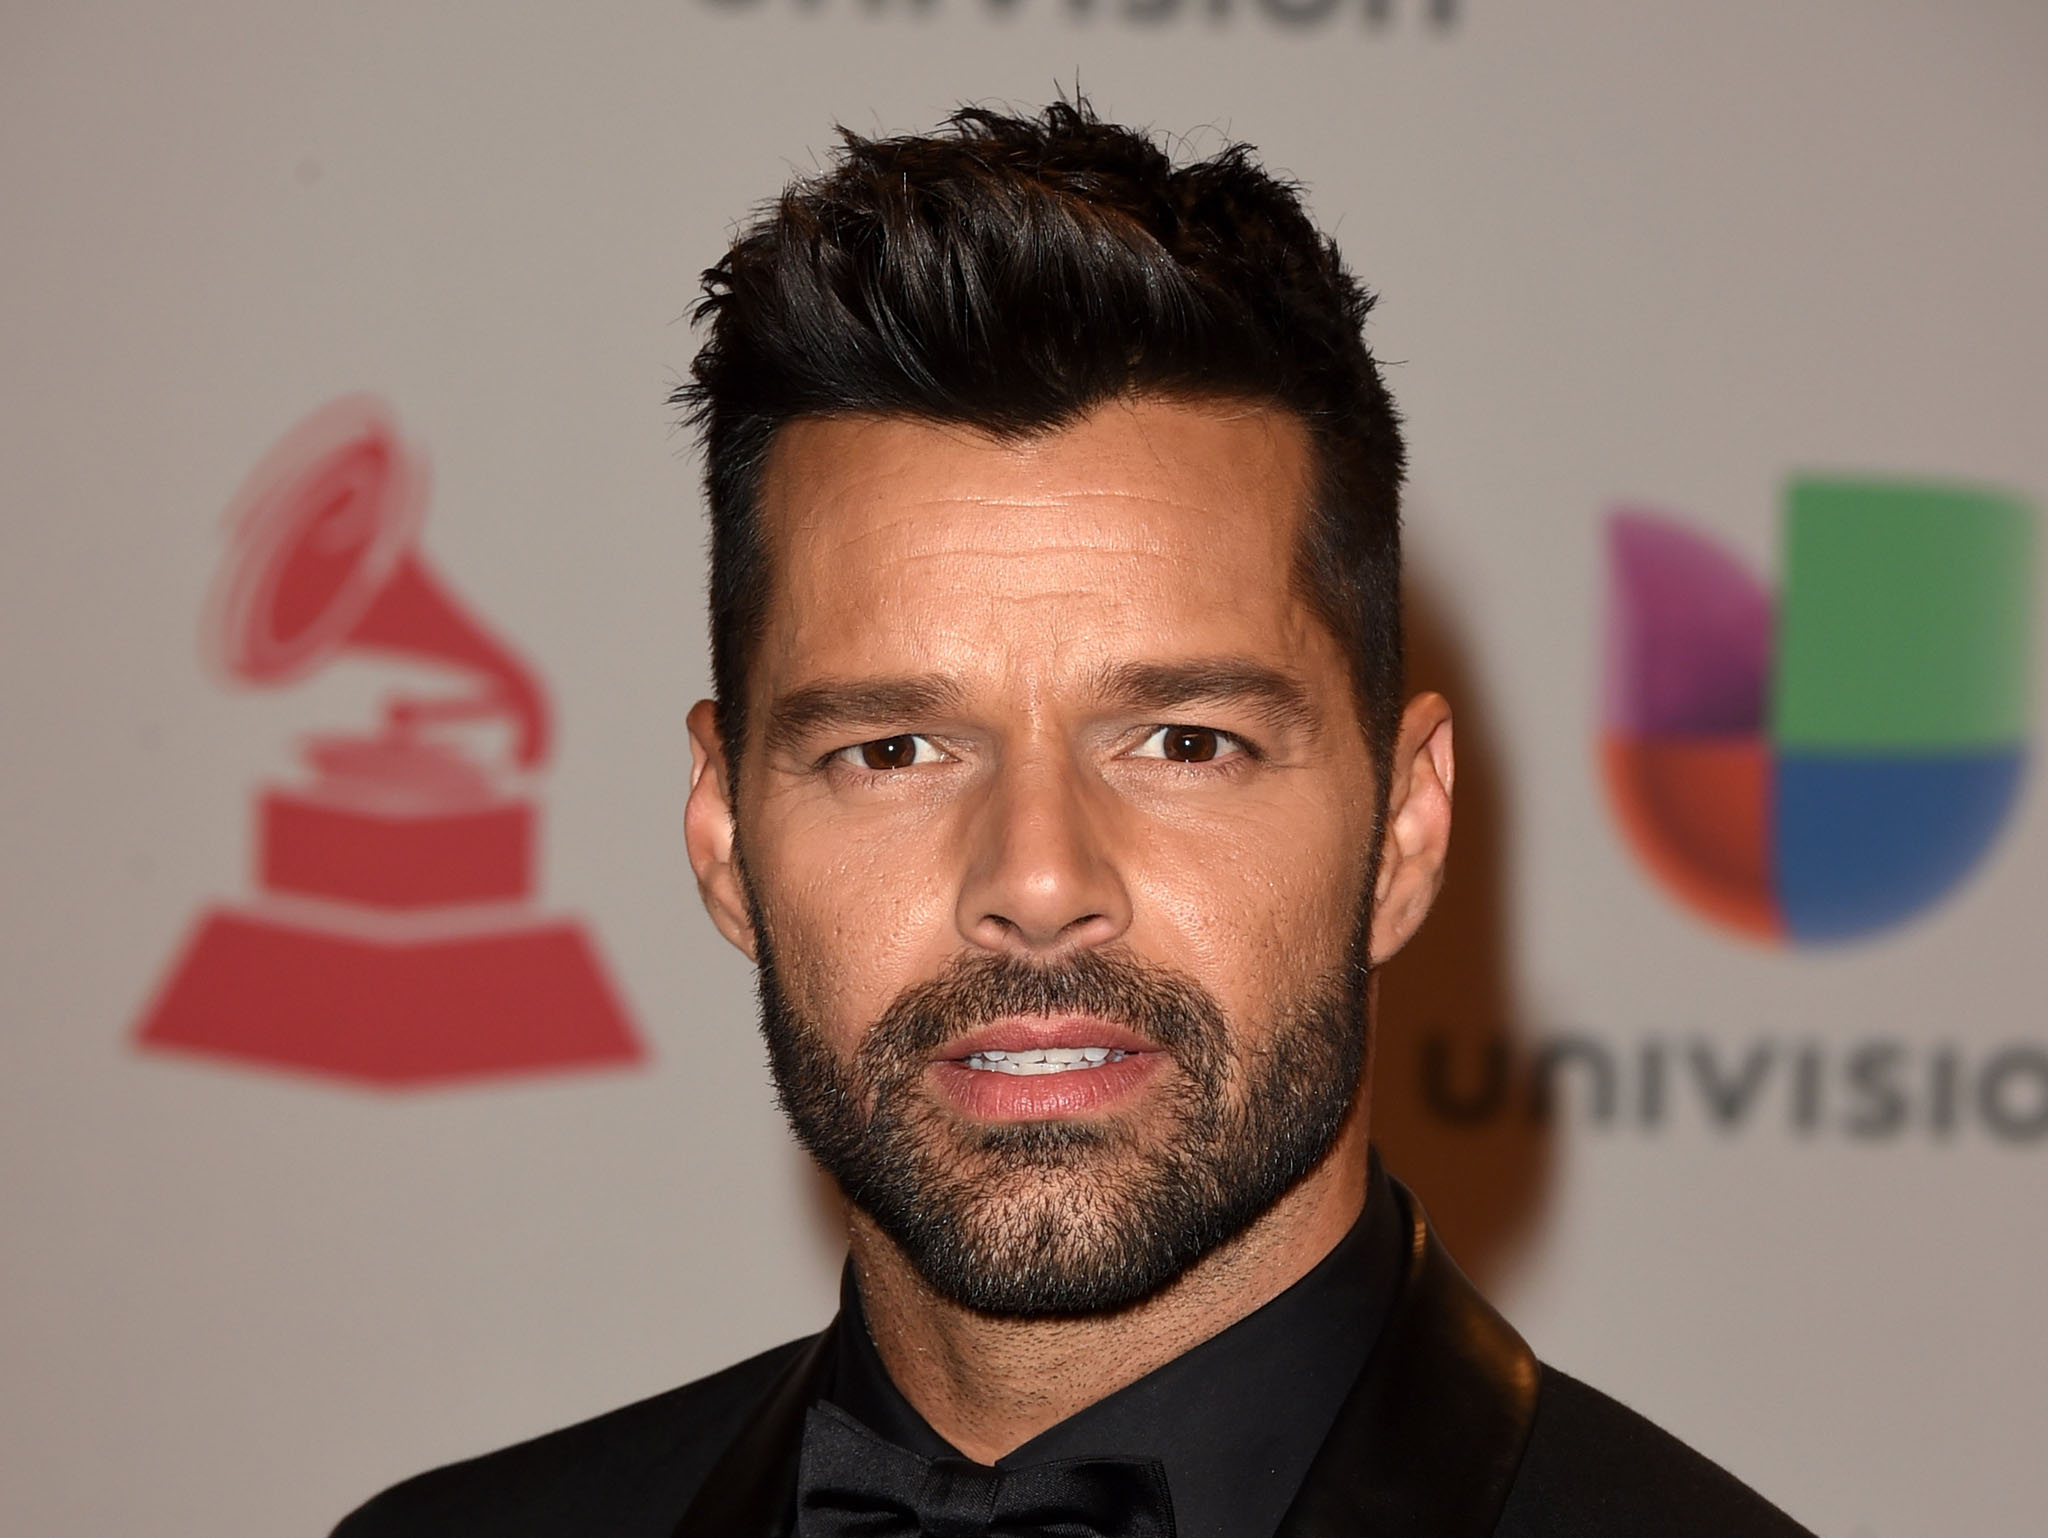 LAS VEGAS, NV - NOVEMBER 20:  Singer Ricky Martin attends the 15th Annual Latin GRAMMY Awards at the MGM Grand Garden Arena on November 20, 2014 in Las Vegas, Nevada.  (Photo by Jason Merritt/Getty Images)